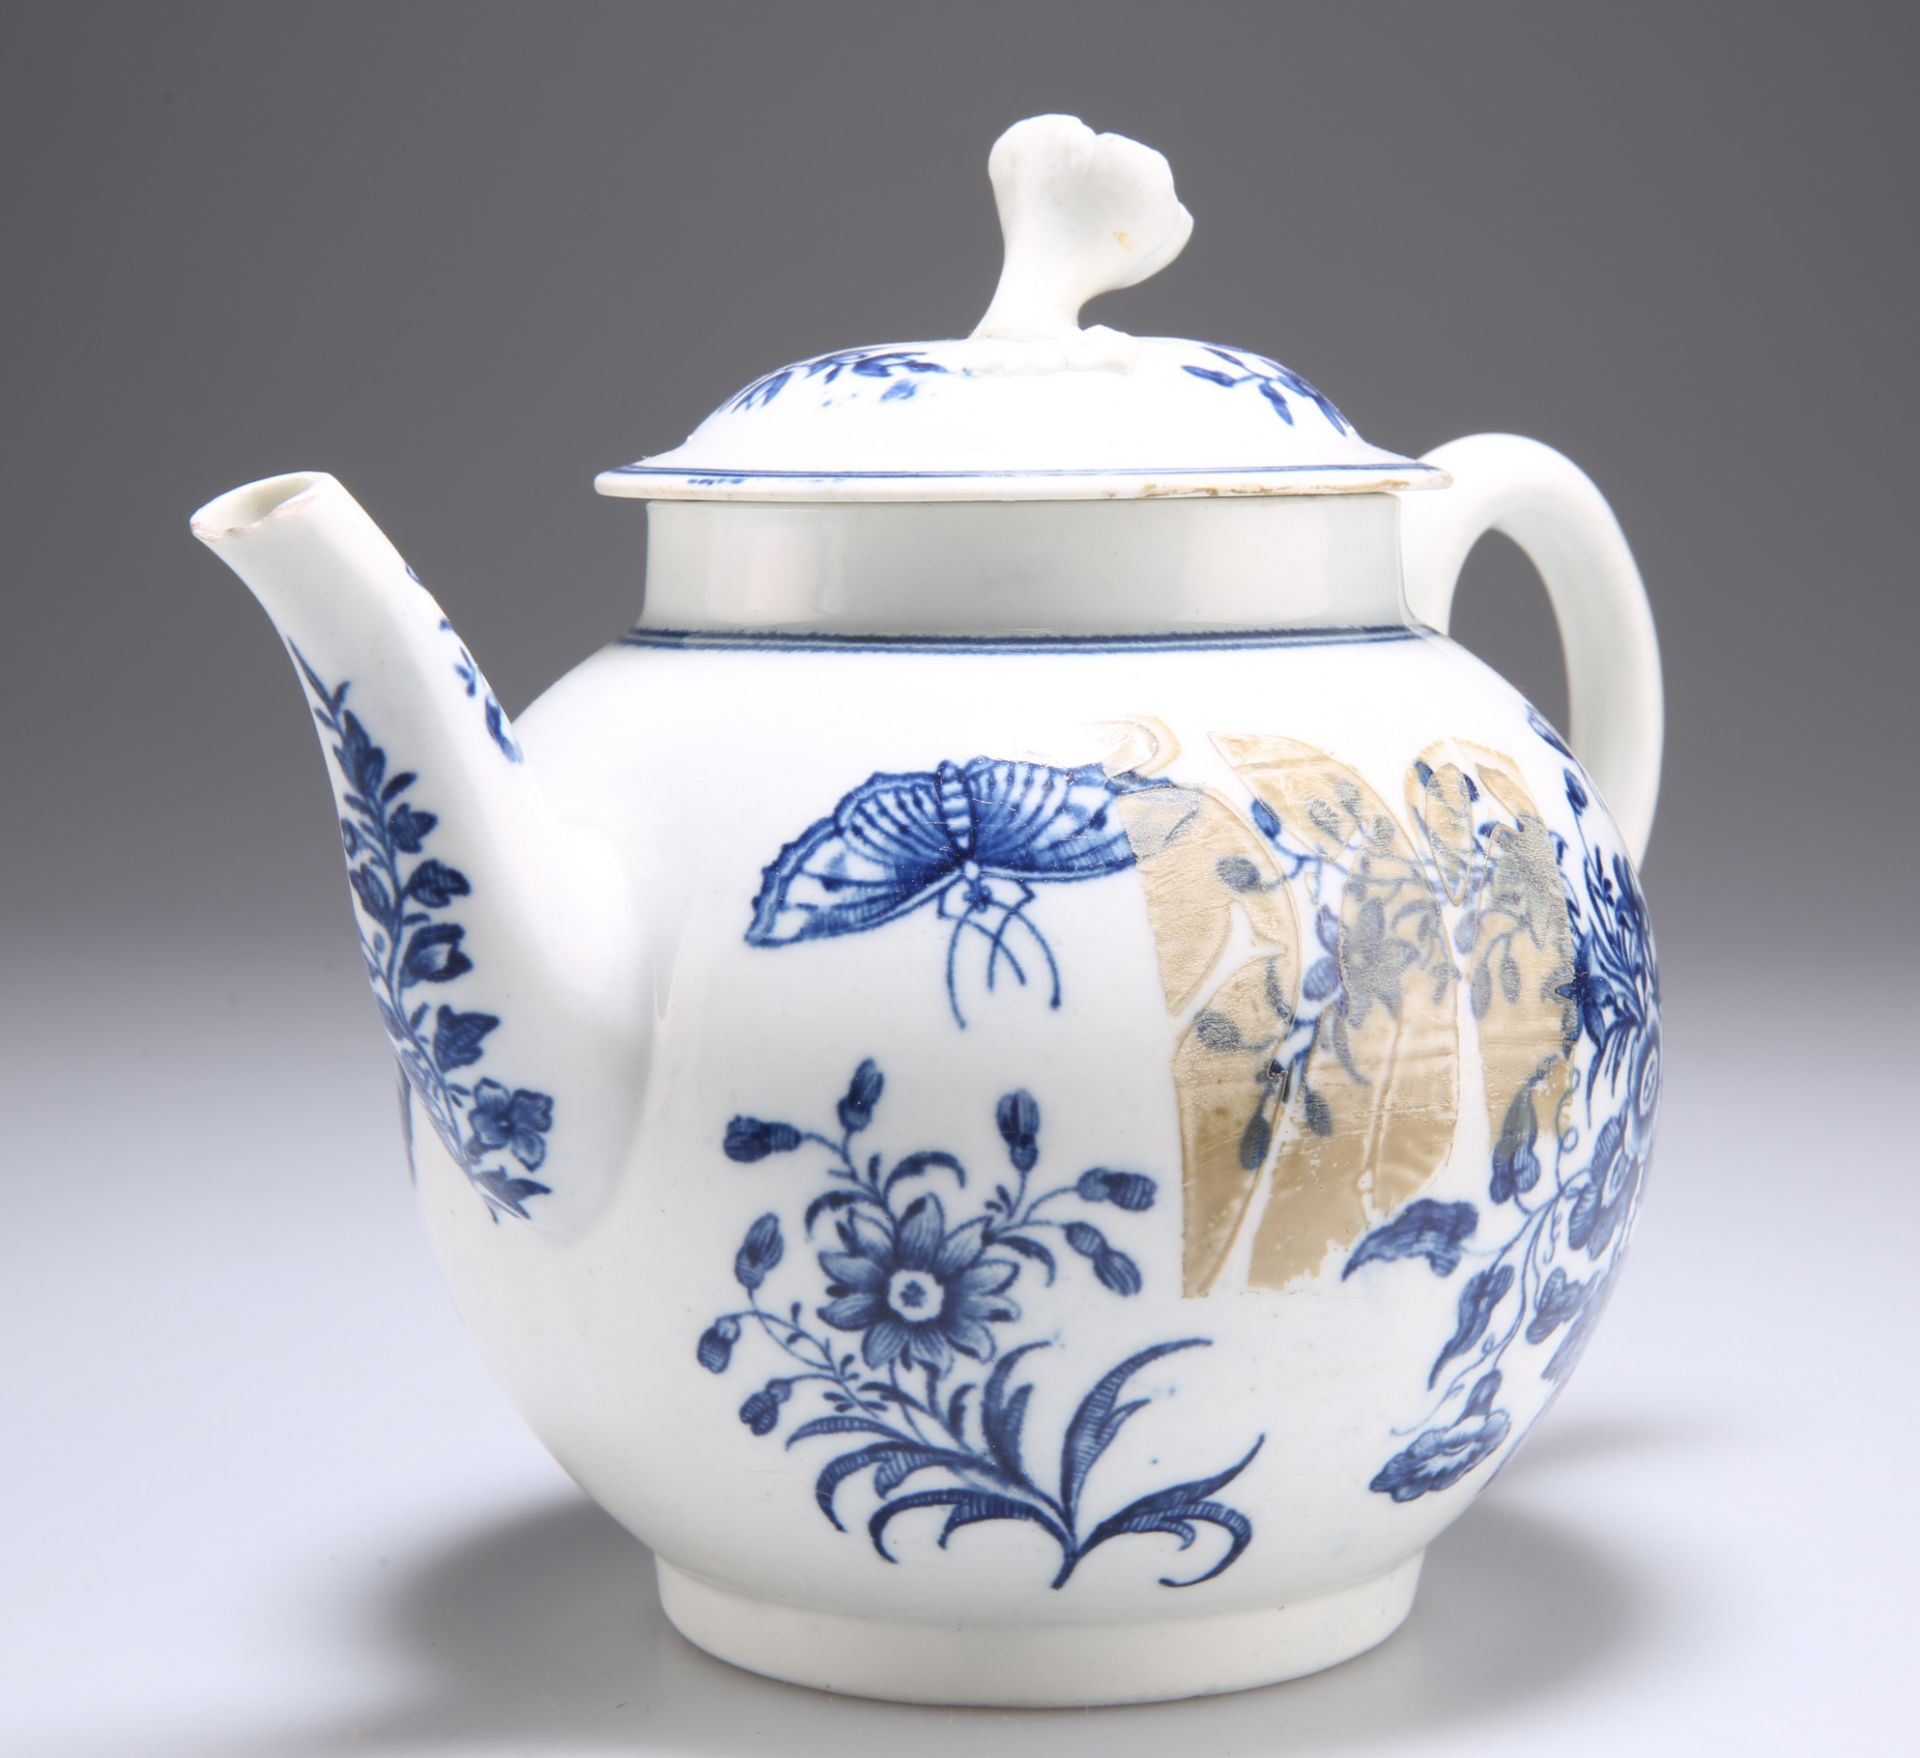 A WORCESTER BLUE AND WHITE PORCELAIN TEAPOT, CIRCA 1770 - Image 2 of 3